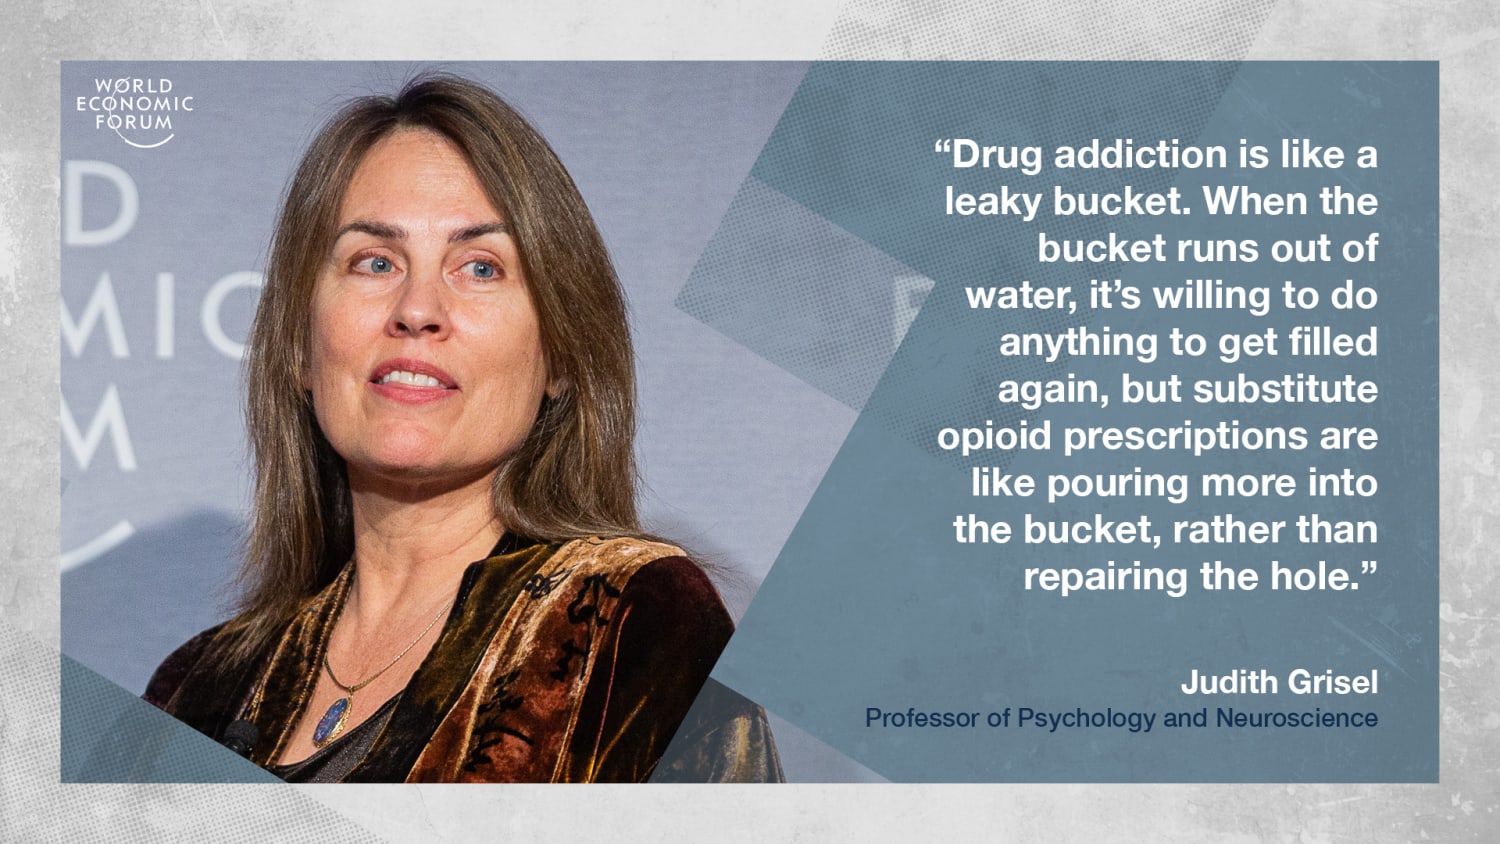 COVID-19 has disrupted addiction treatment: a neuroscientist answers our questions